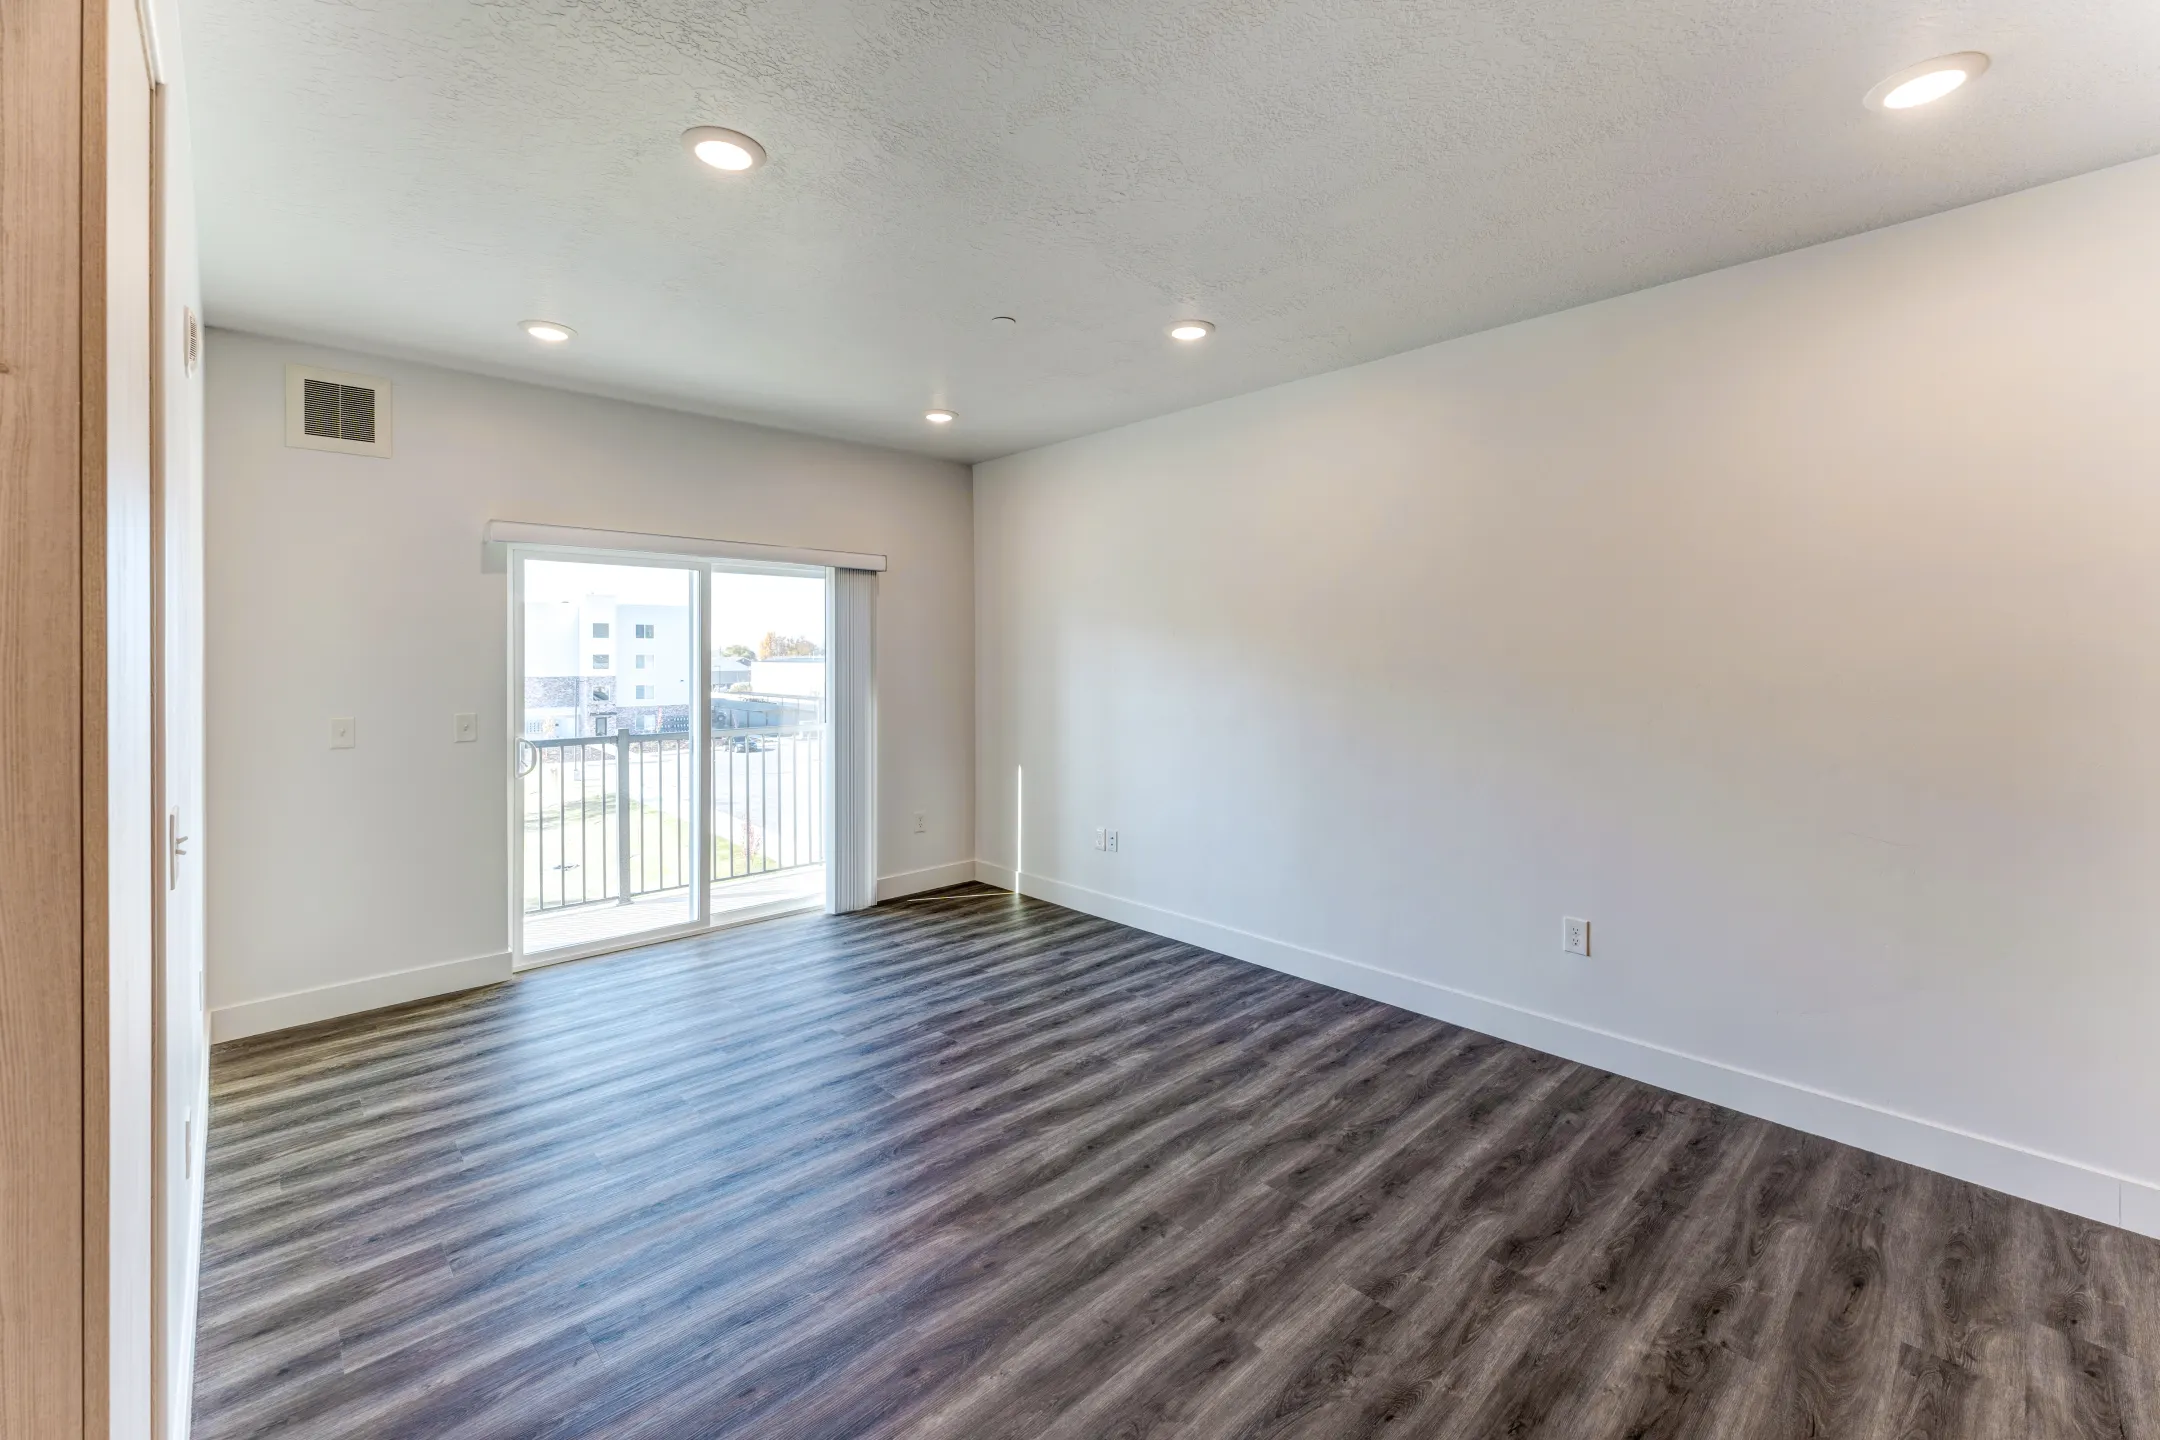 Living Room - Wall and 17th Apartments - Ogden, UT